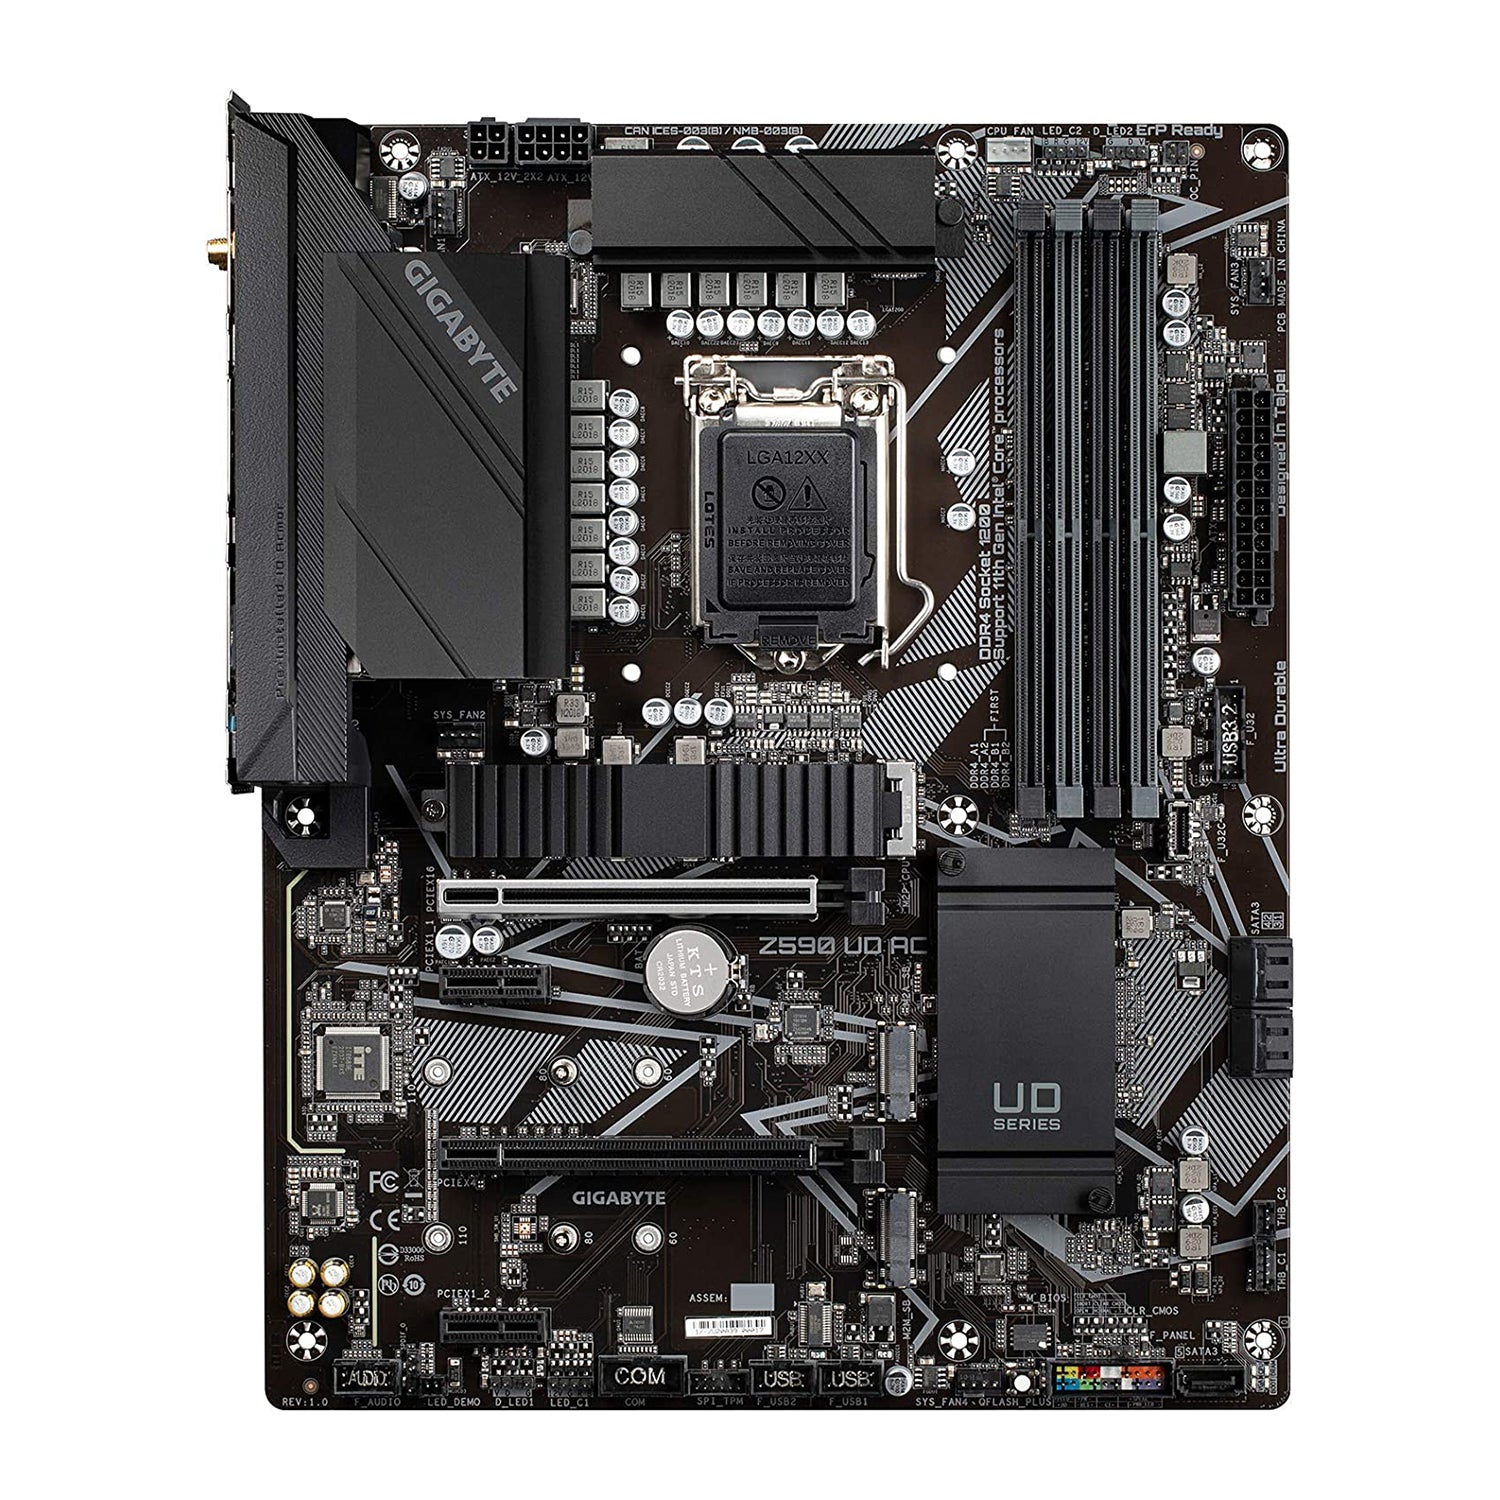 GIGABYTE Z590 Ultra Durable Motherboard ATX, 10th/ 11th Gen Intel Core, LGA 1200 Socket with Direct 12+1 Phases Digital VRM and DrMOS, Thermal Design with Integrated IO Armor, USB TYPE-C, RGB FUSION 2.0, Q-Flash Plus, DP